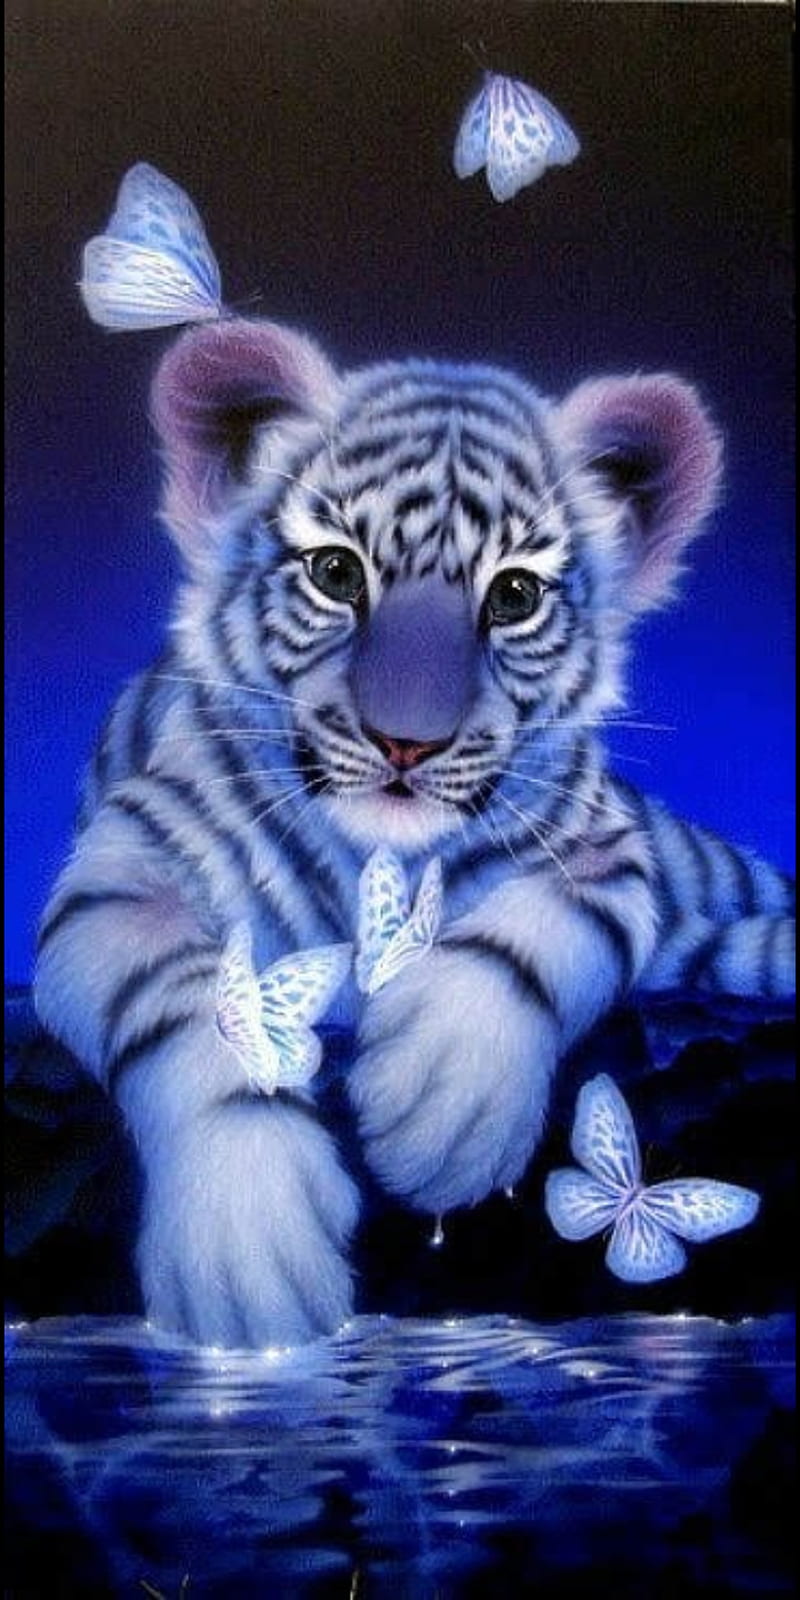 white tiger cubs with blue eyes in snow